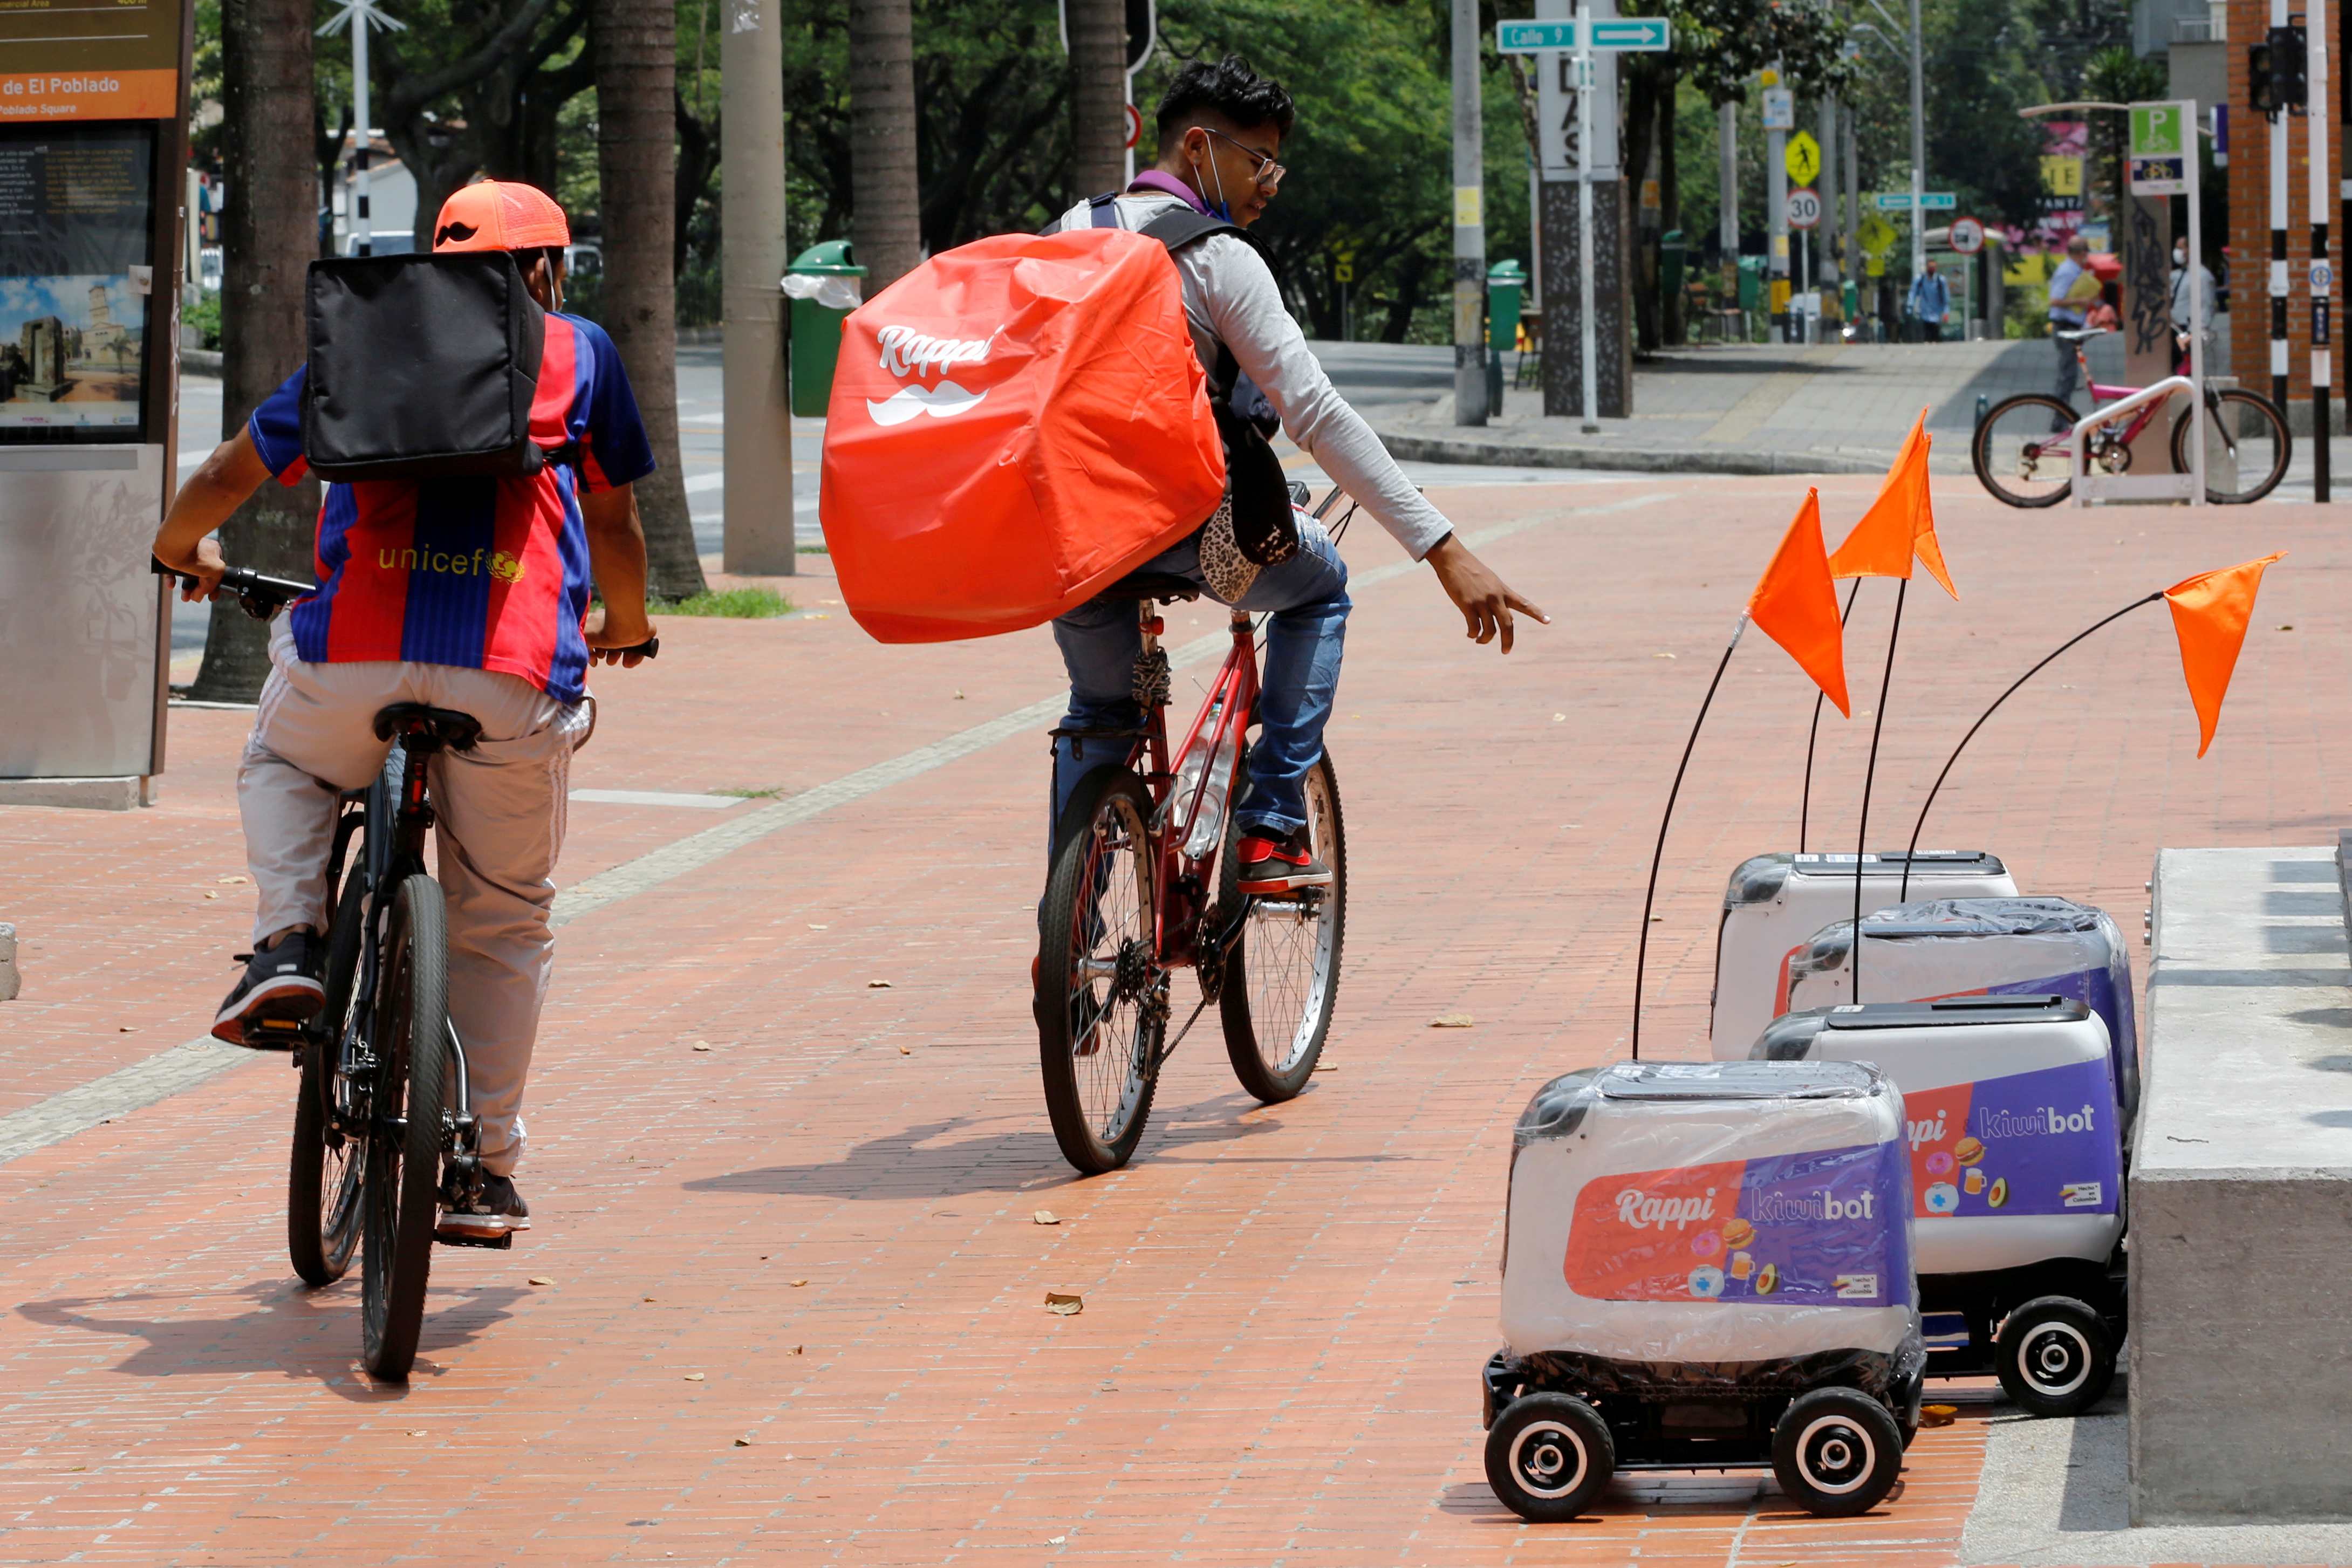 Rappi delivery workers observe delivery robots from the Colombian company Rappi in Medellin